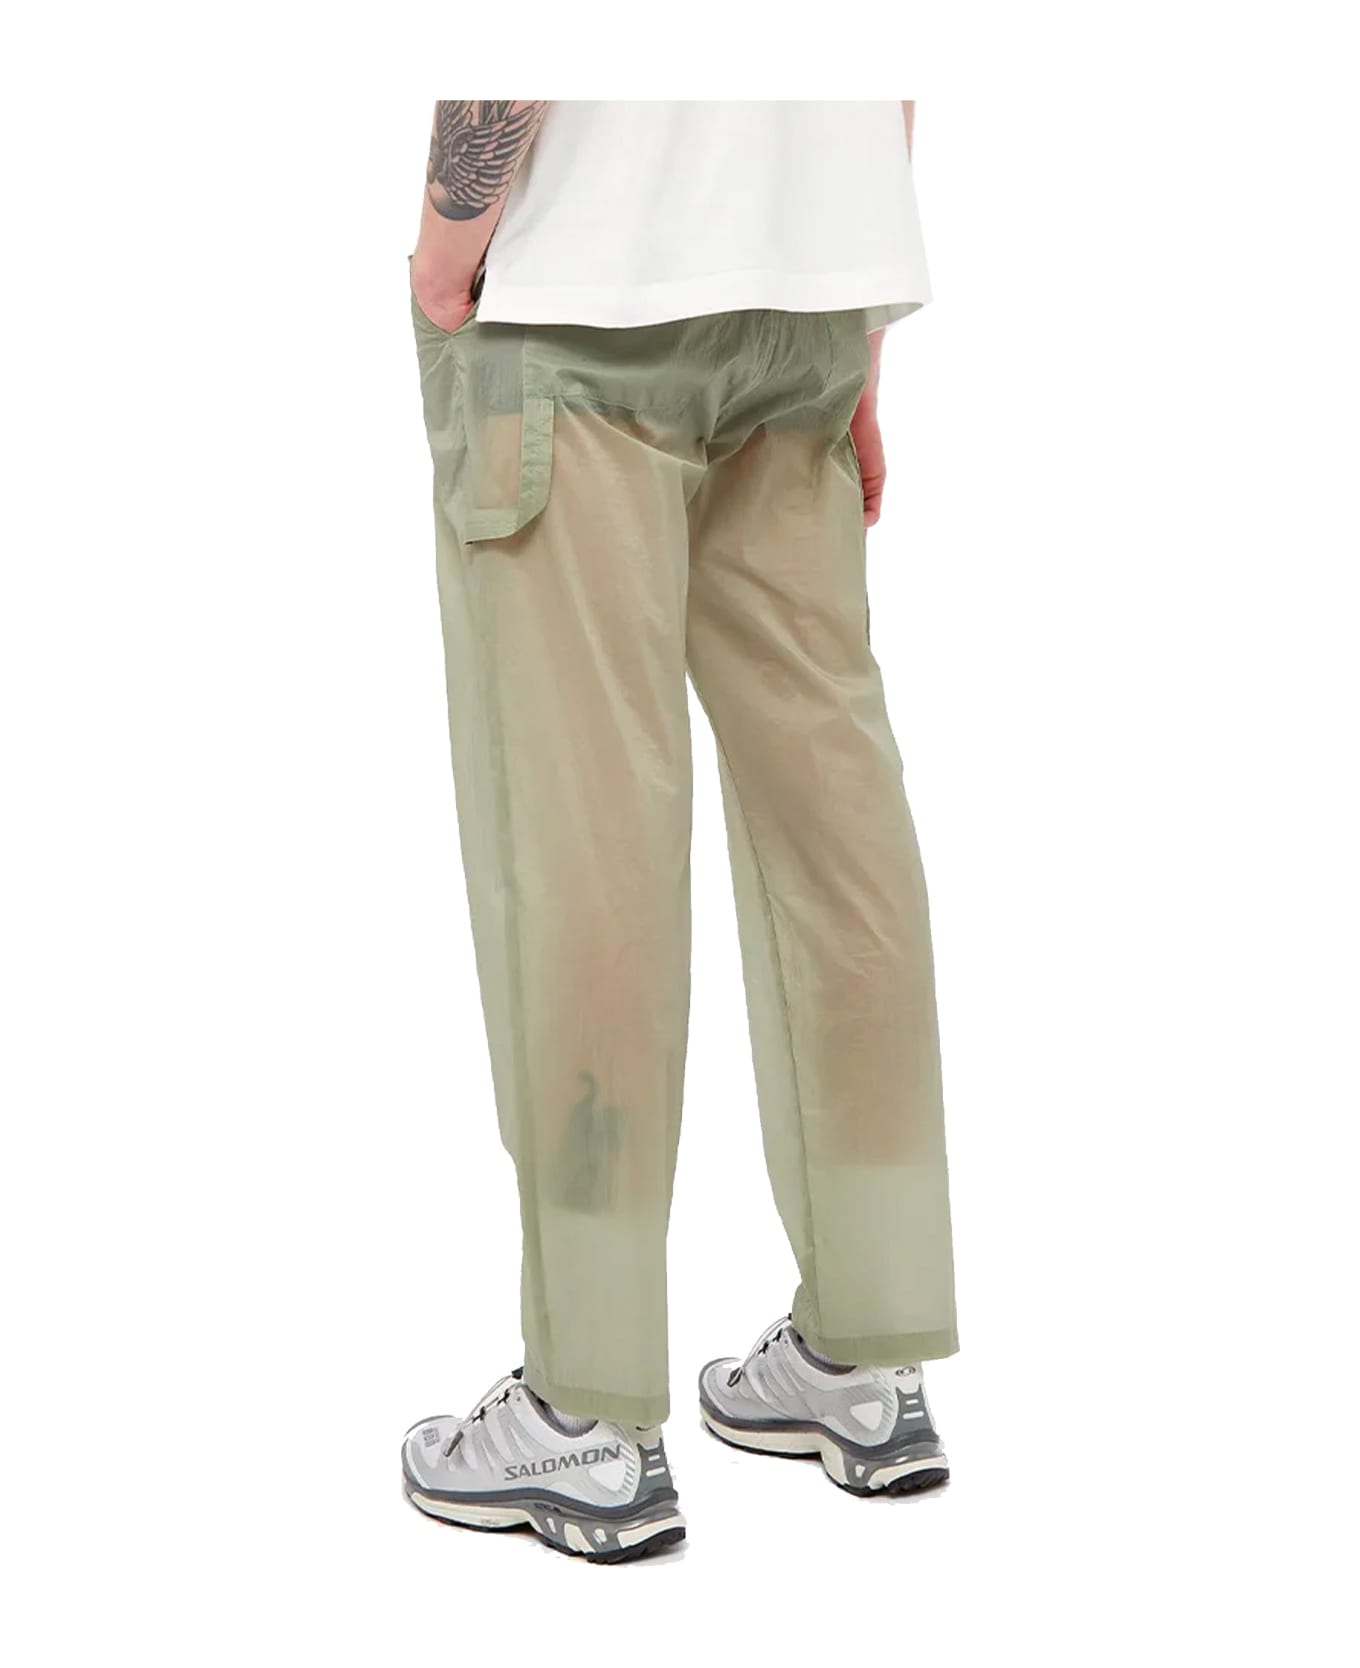 Moncler Genius Genius Hot Lightweight Cady Trousers - Green ボトムス